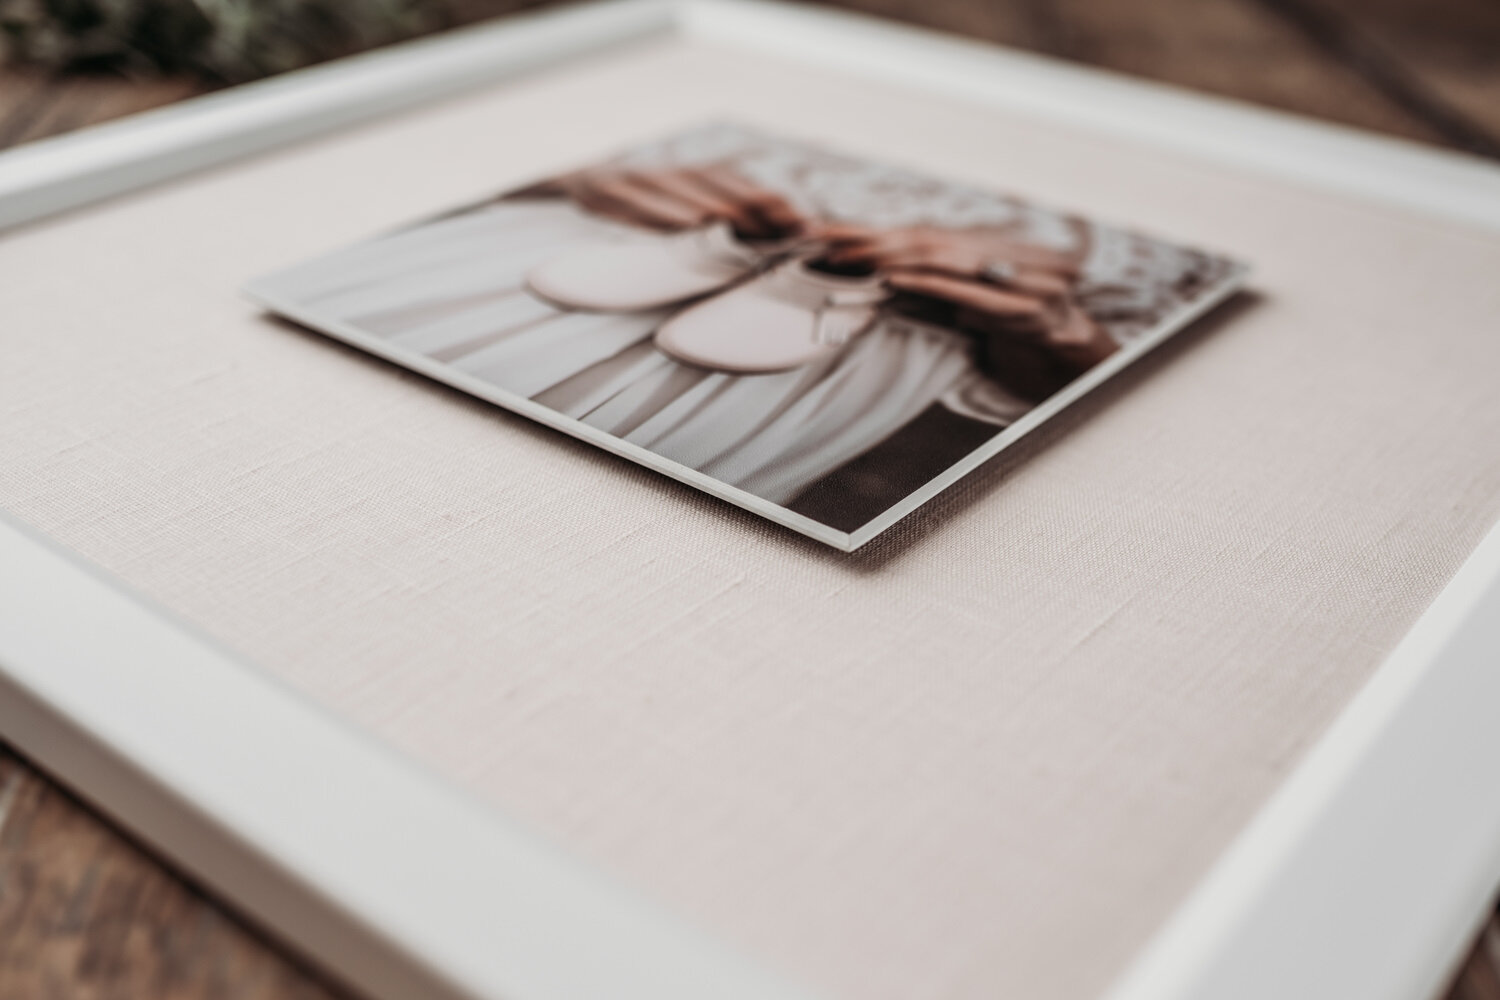 Blush coloured framed float mount with professional maternity photo. (Copy) (Copy)